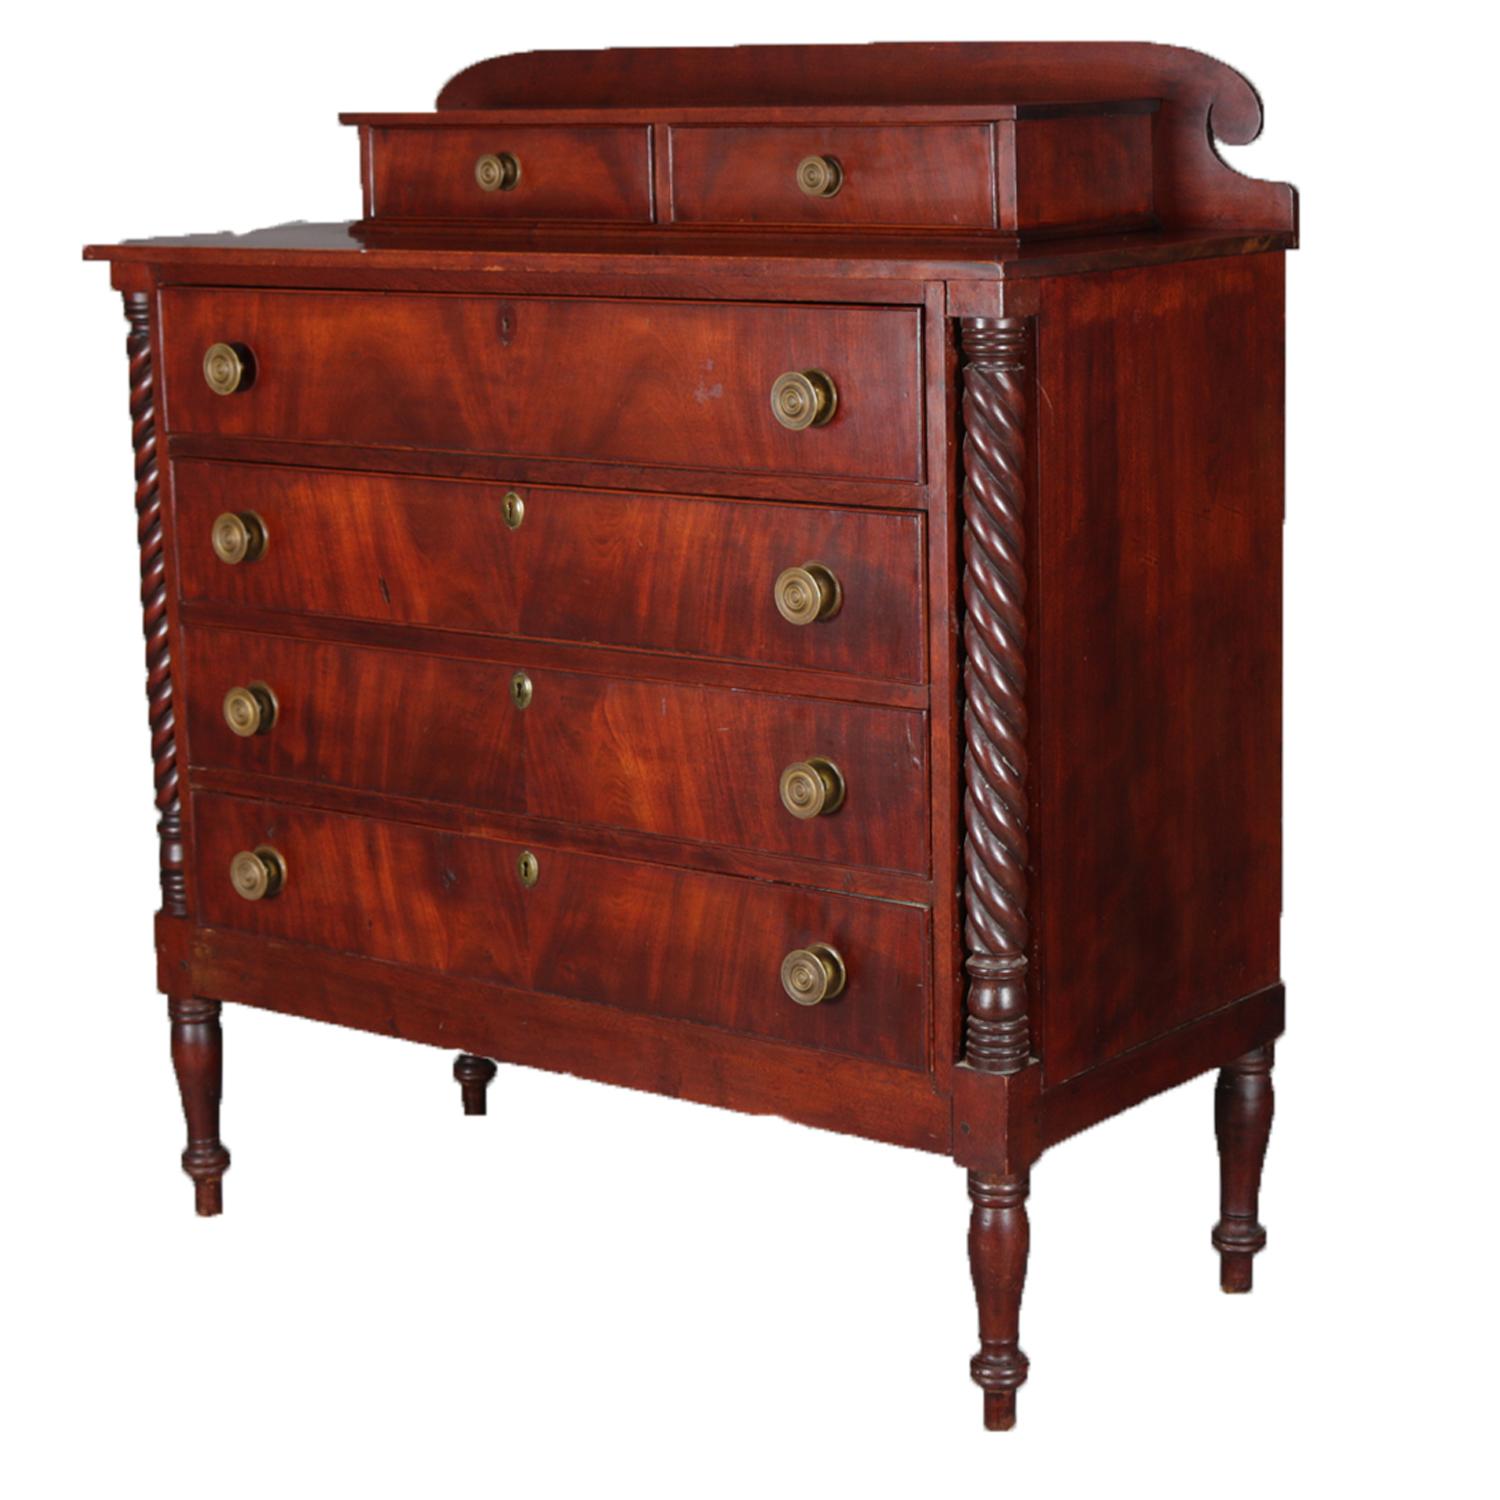 Antique Flame Mahogany Sheraton Chest with Full Rope Twist Columns, circa 1830